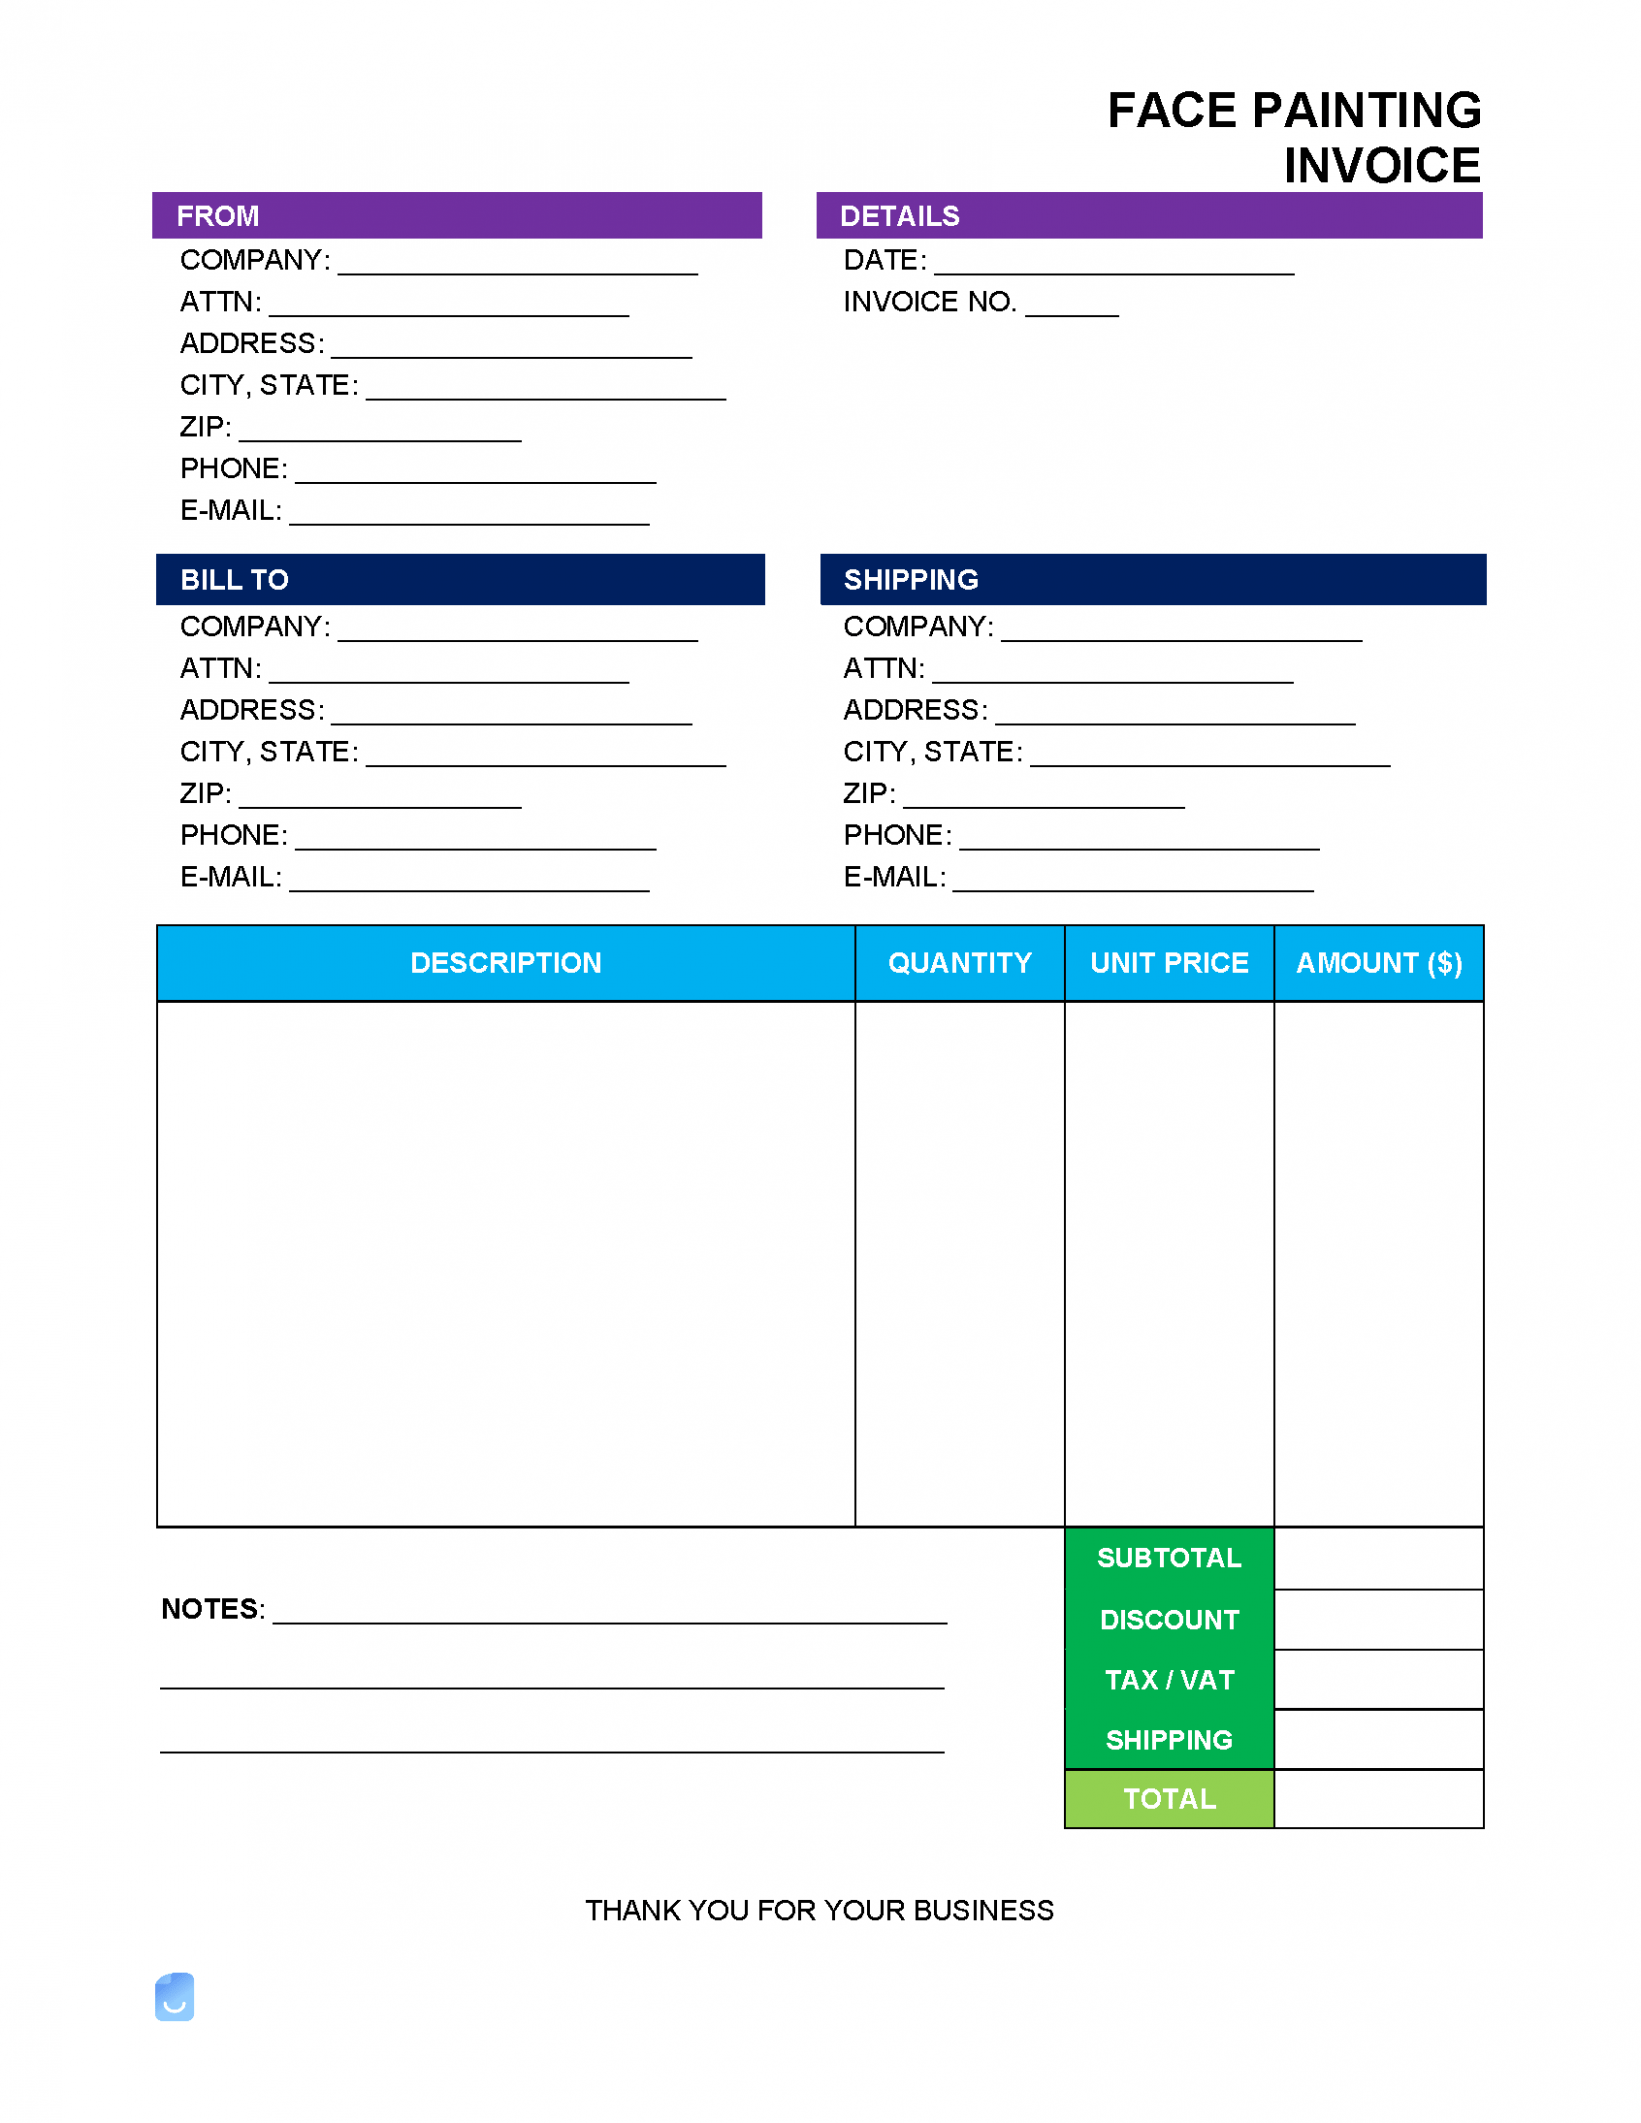 Printable Face Painting Invoice Template Doc